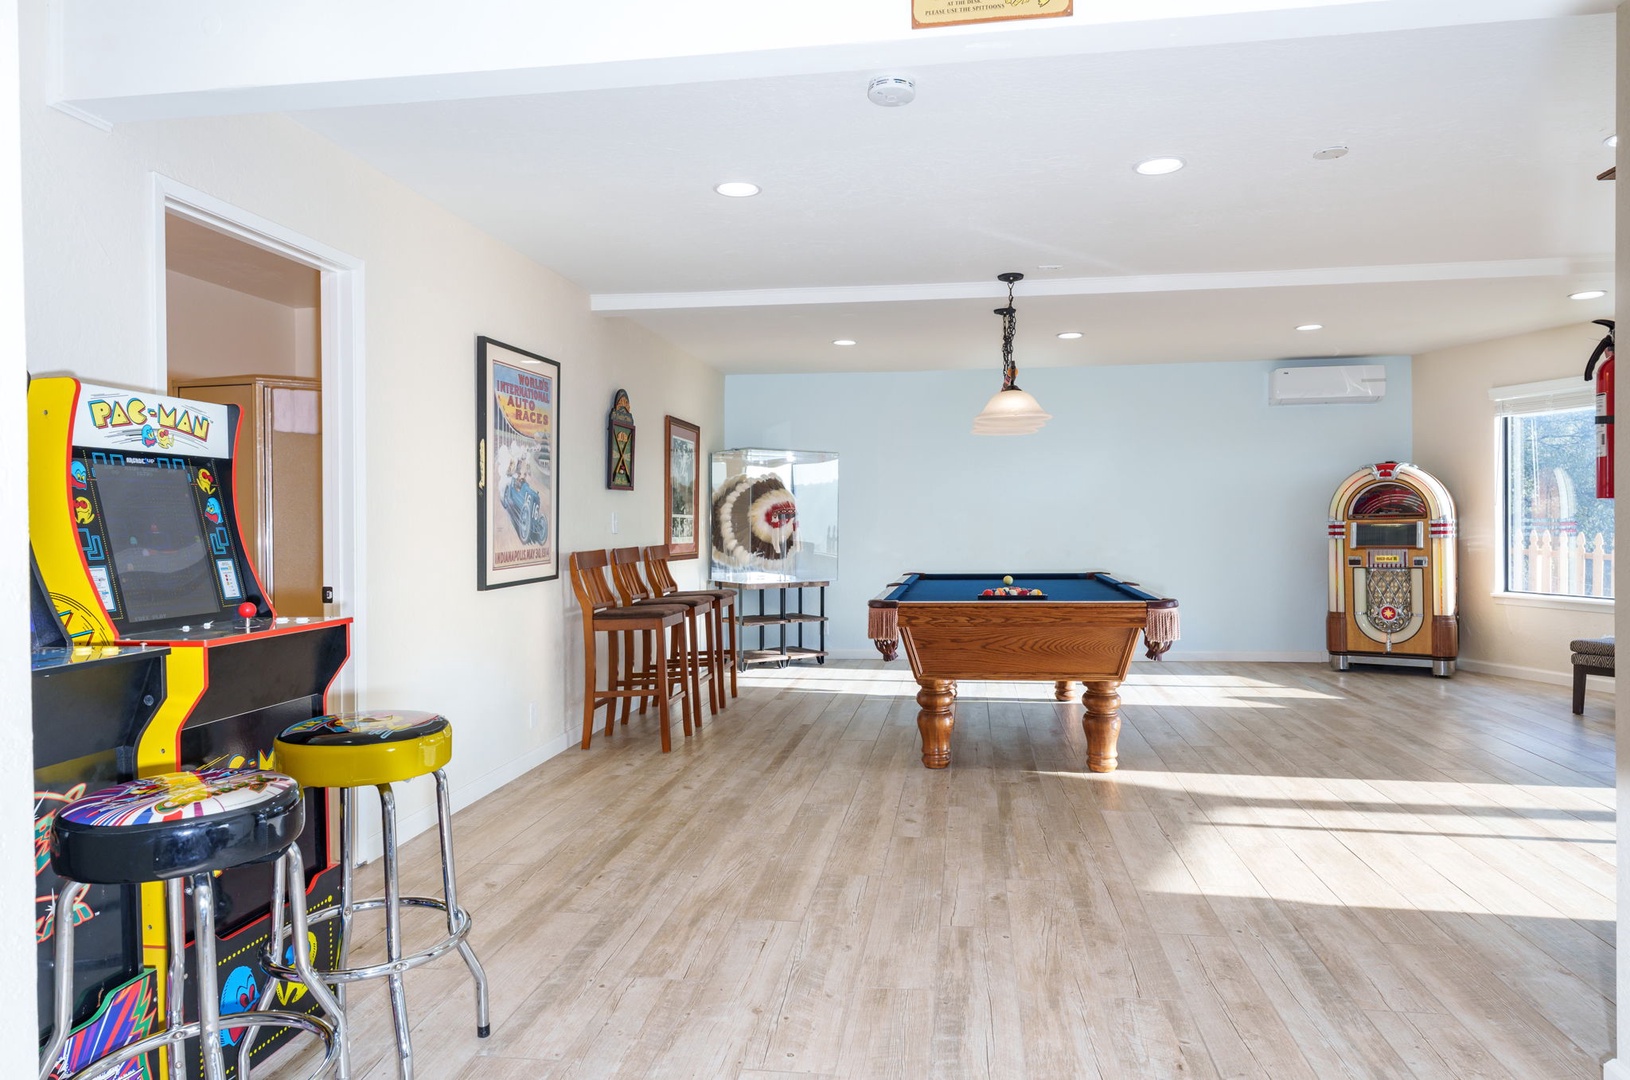 The Basement Game Room will be a family favorite with its Pool Table and other incredible amenities